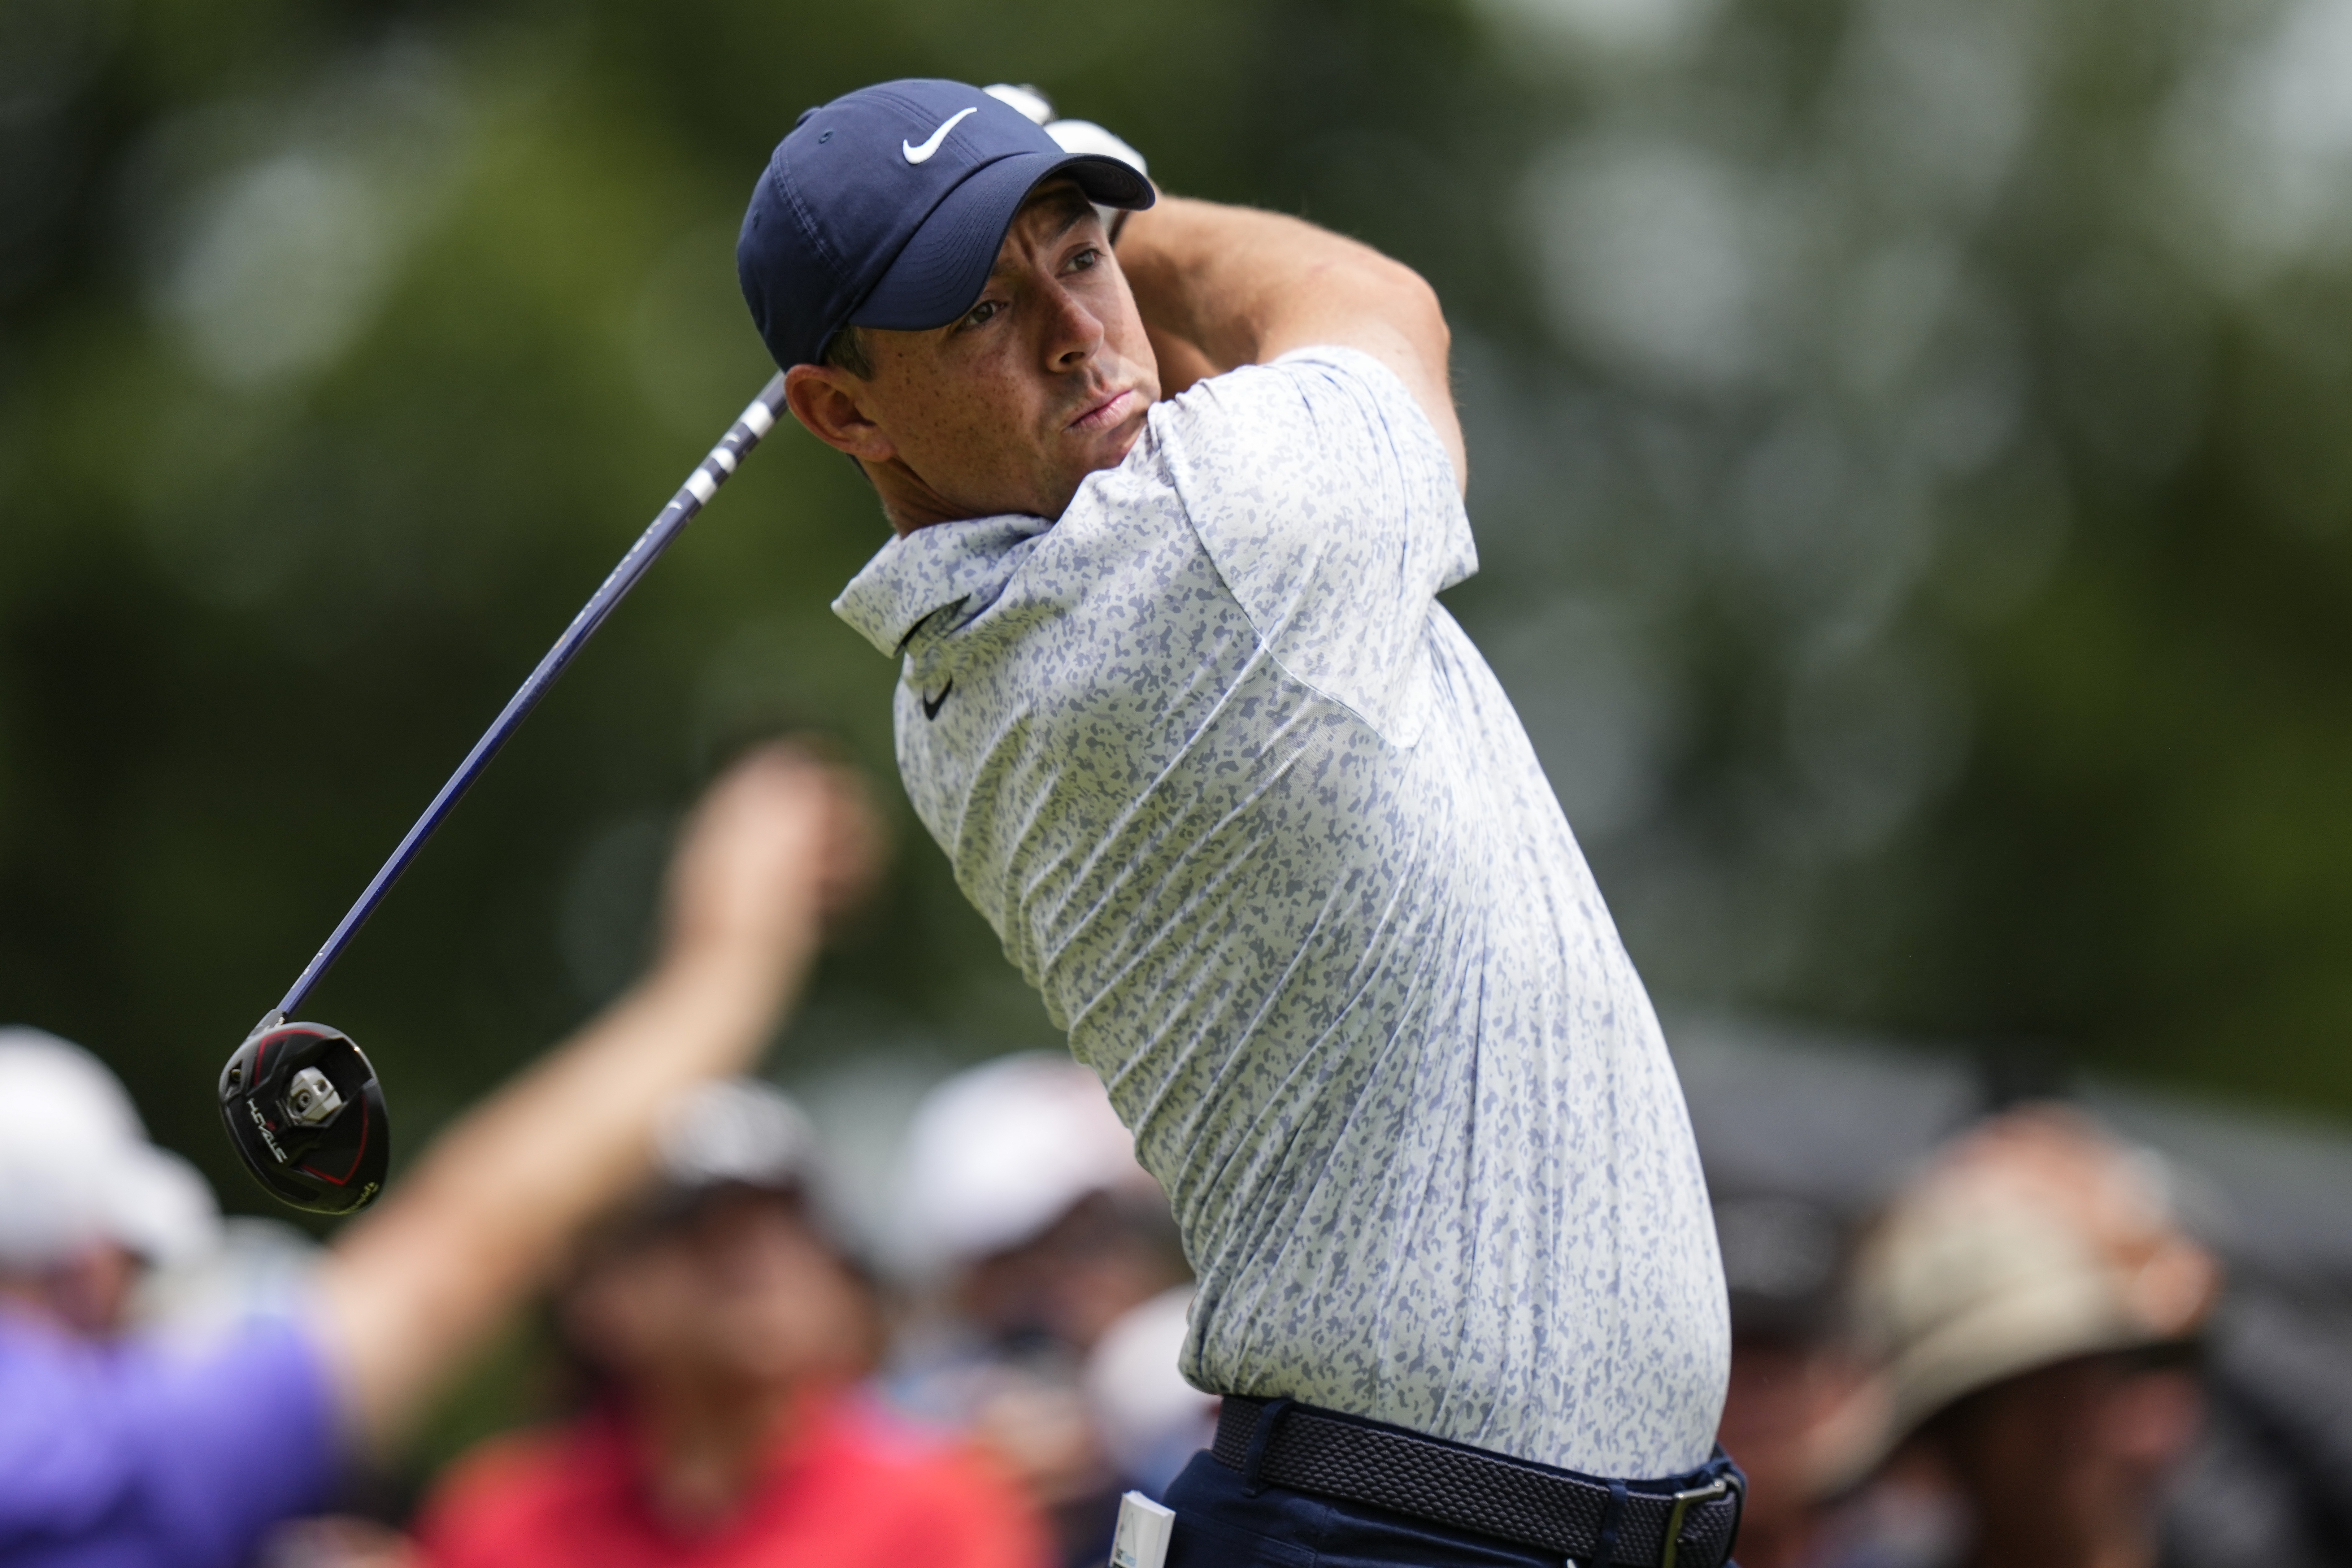 Watch Rory McIlroy sink first career hole-in-one on PGA Tour (video)